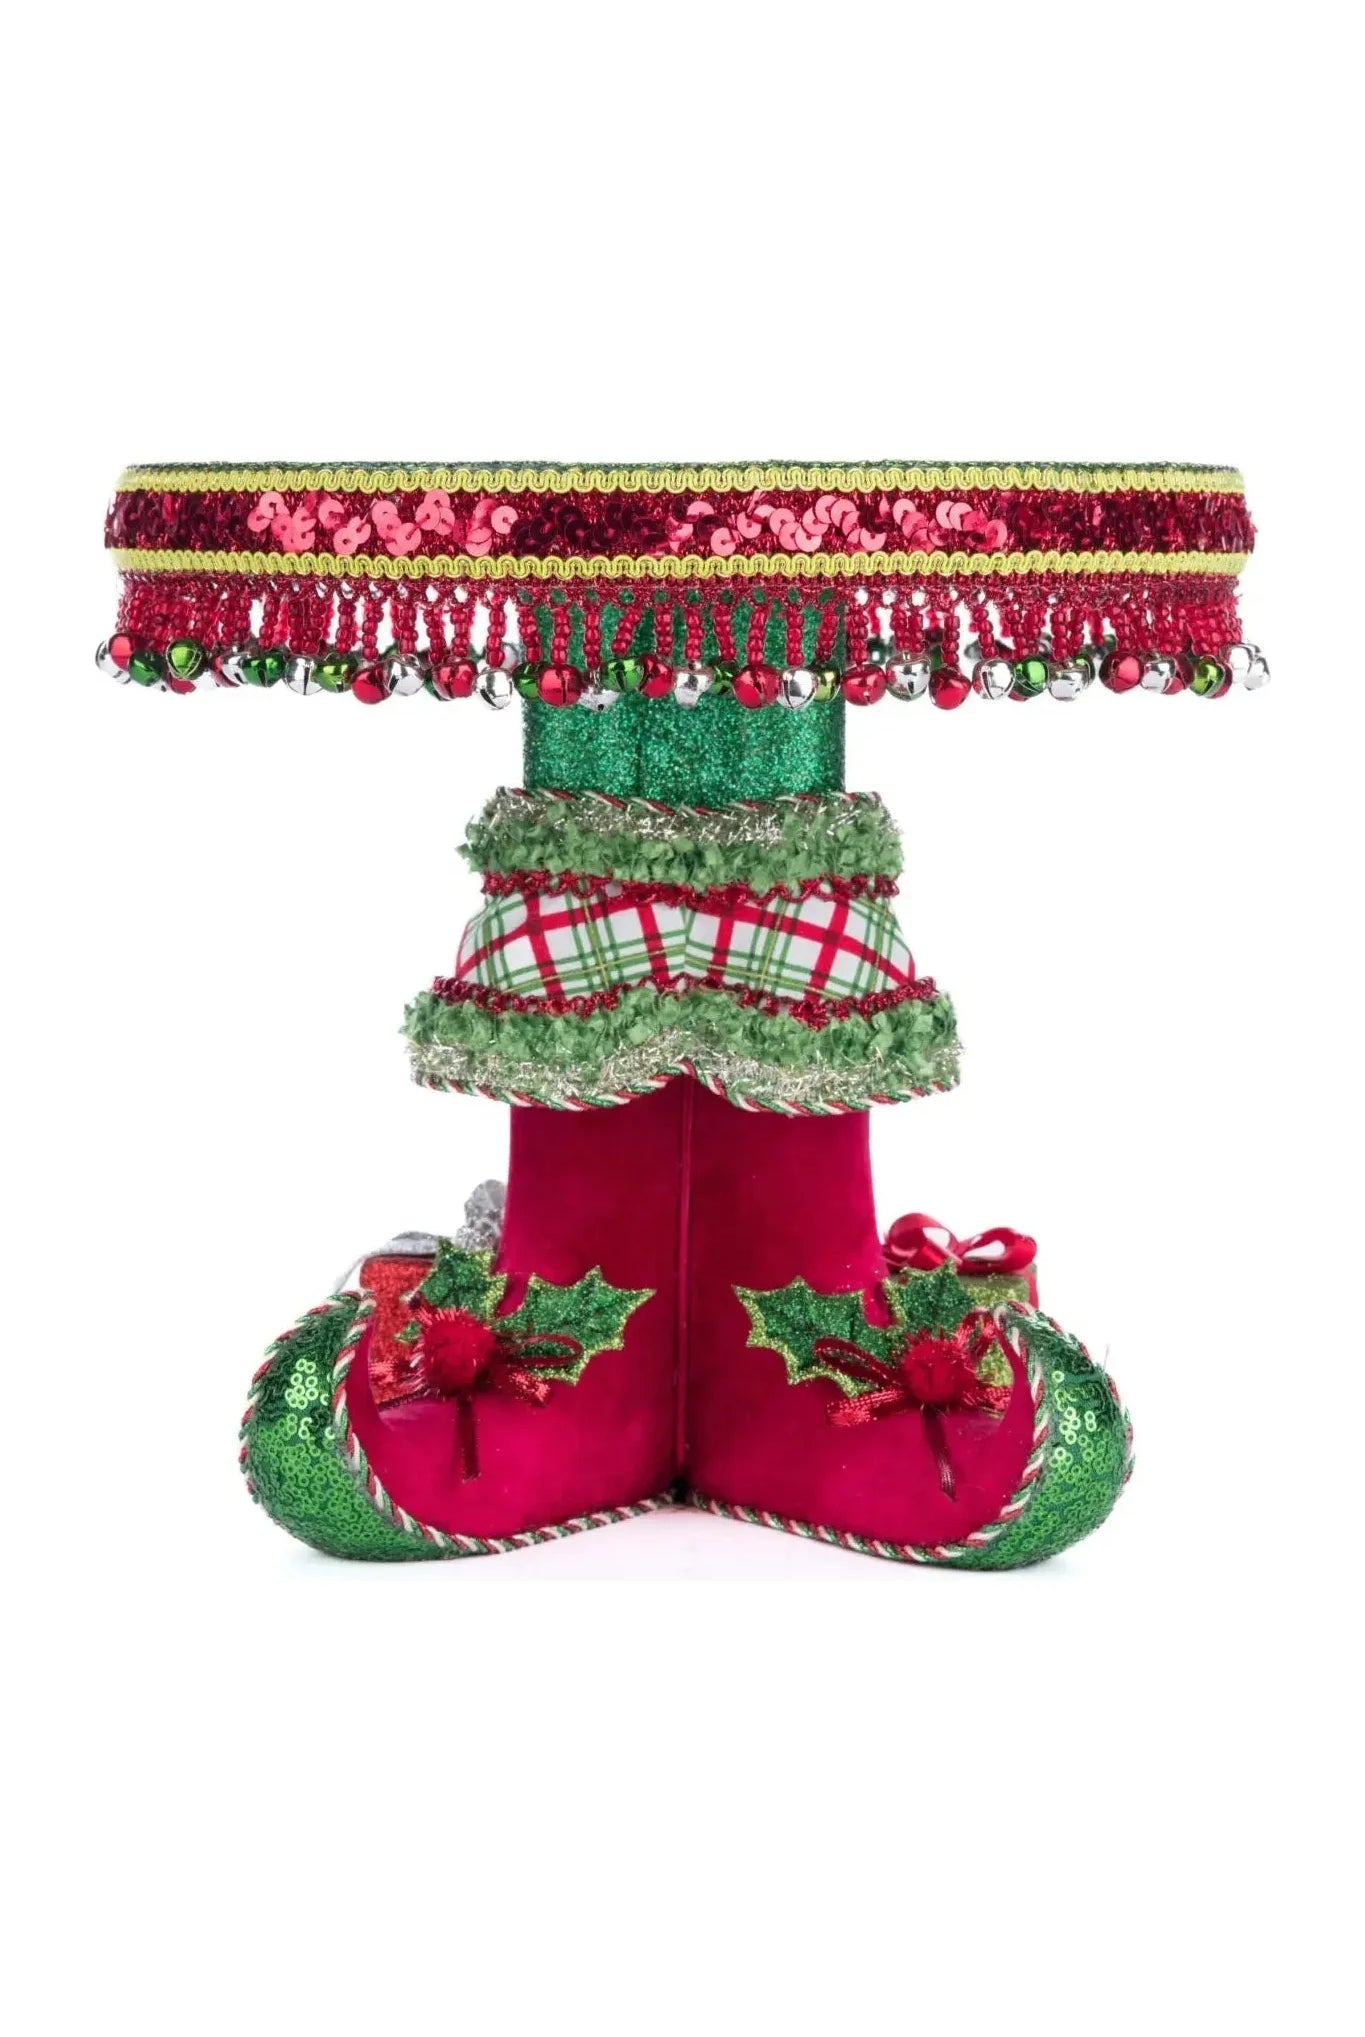 Shop For Elf Boots Cake Plate 28-428347